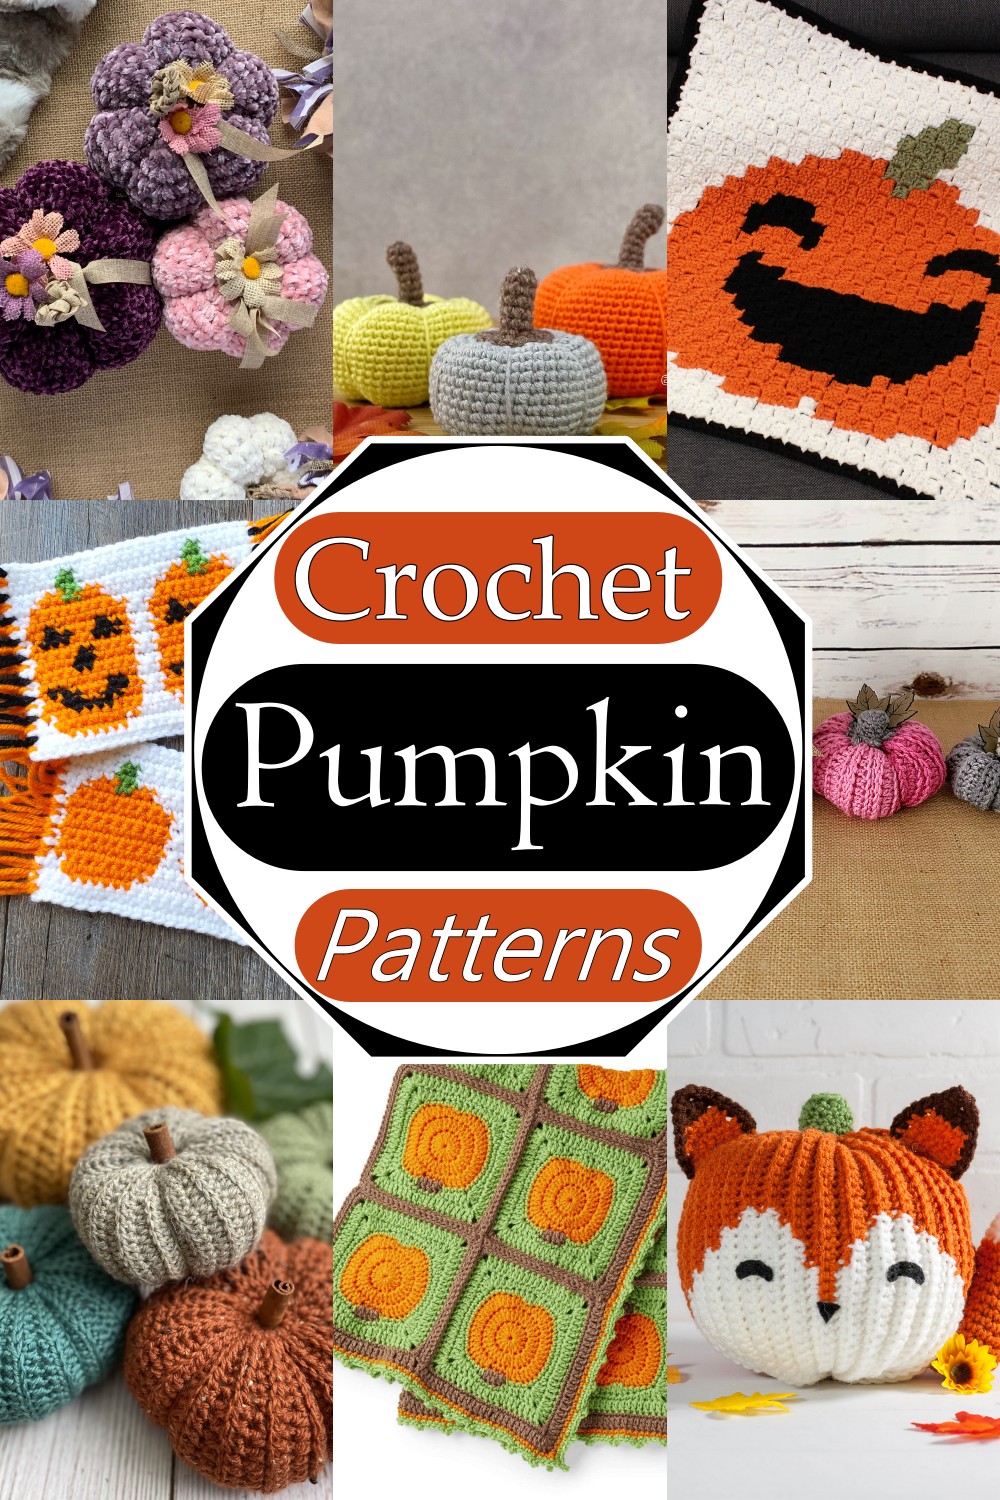 Crochet Pumpkin Patterns For Decor, Playing And Cozy Items